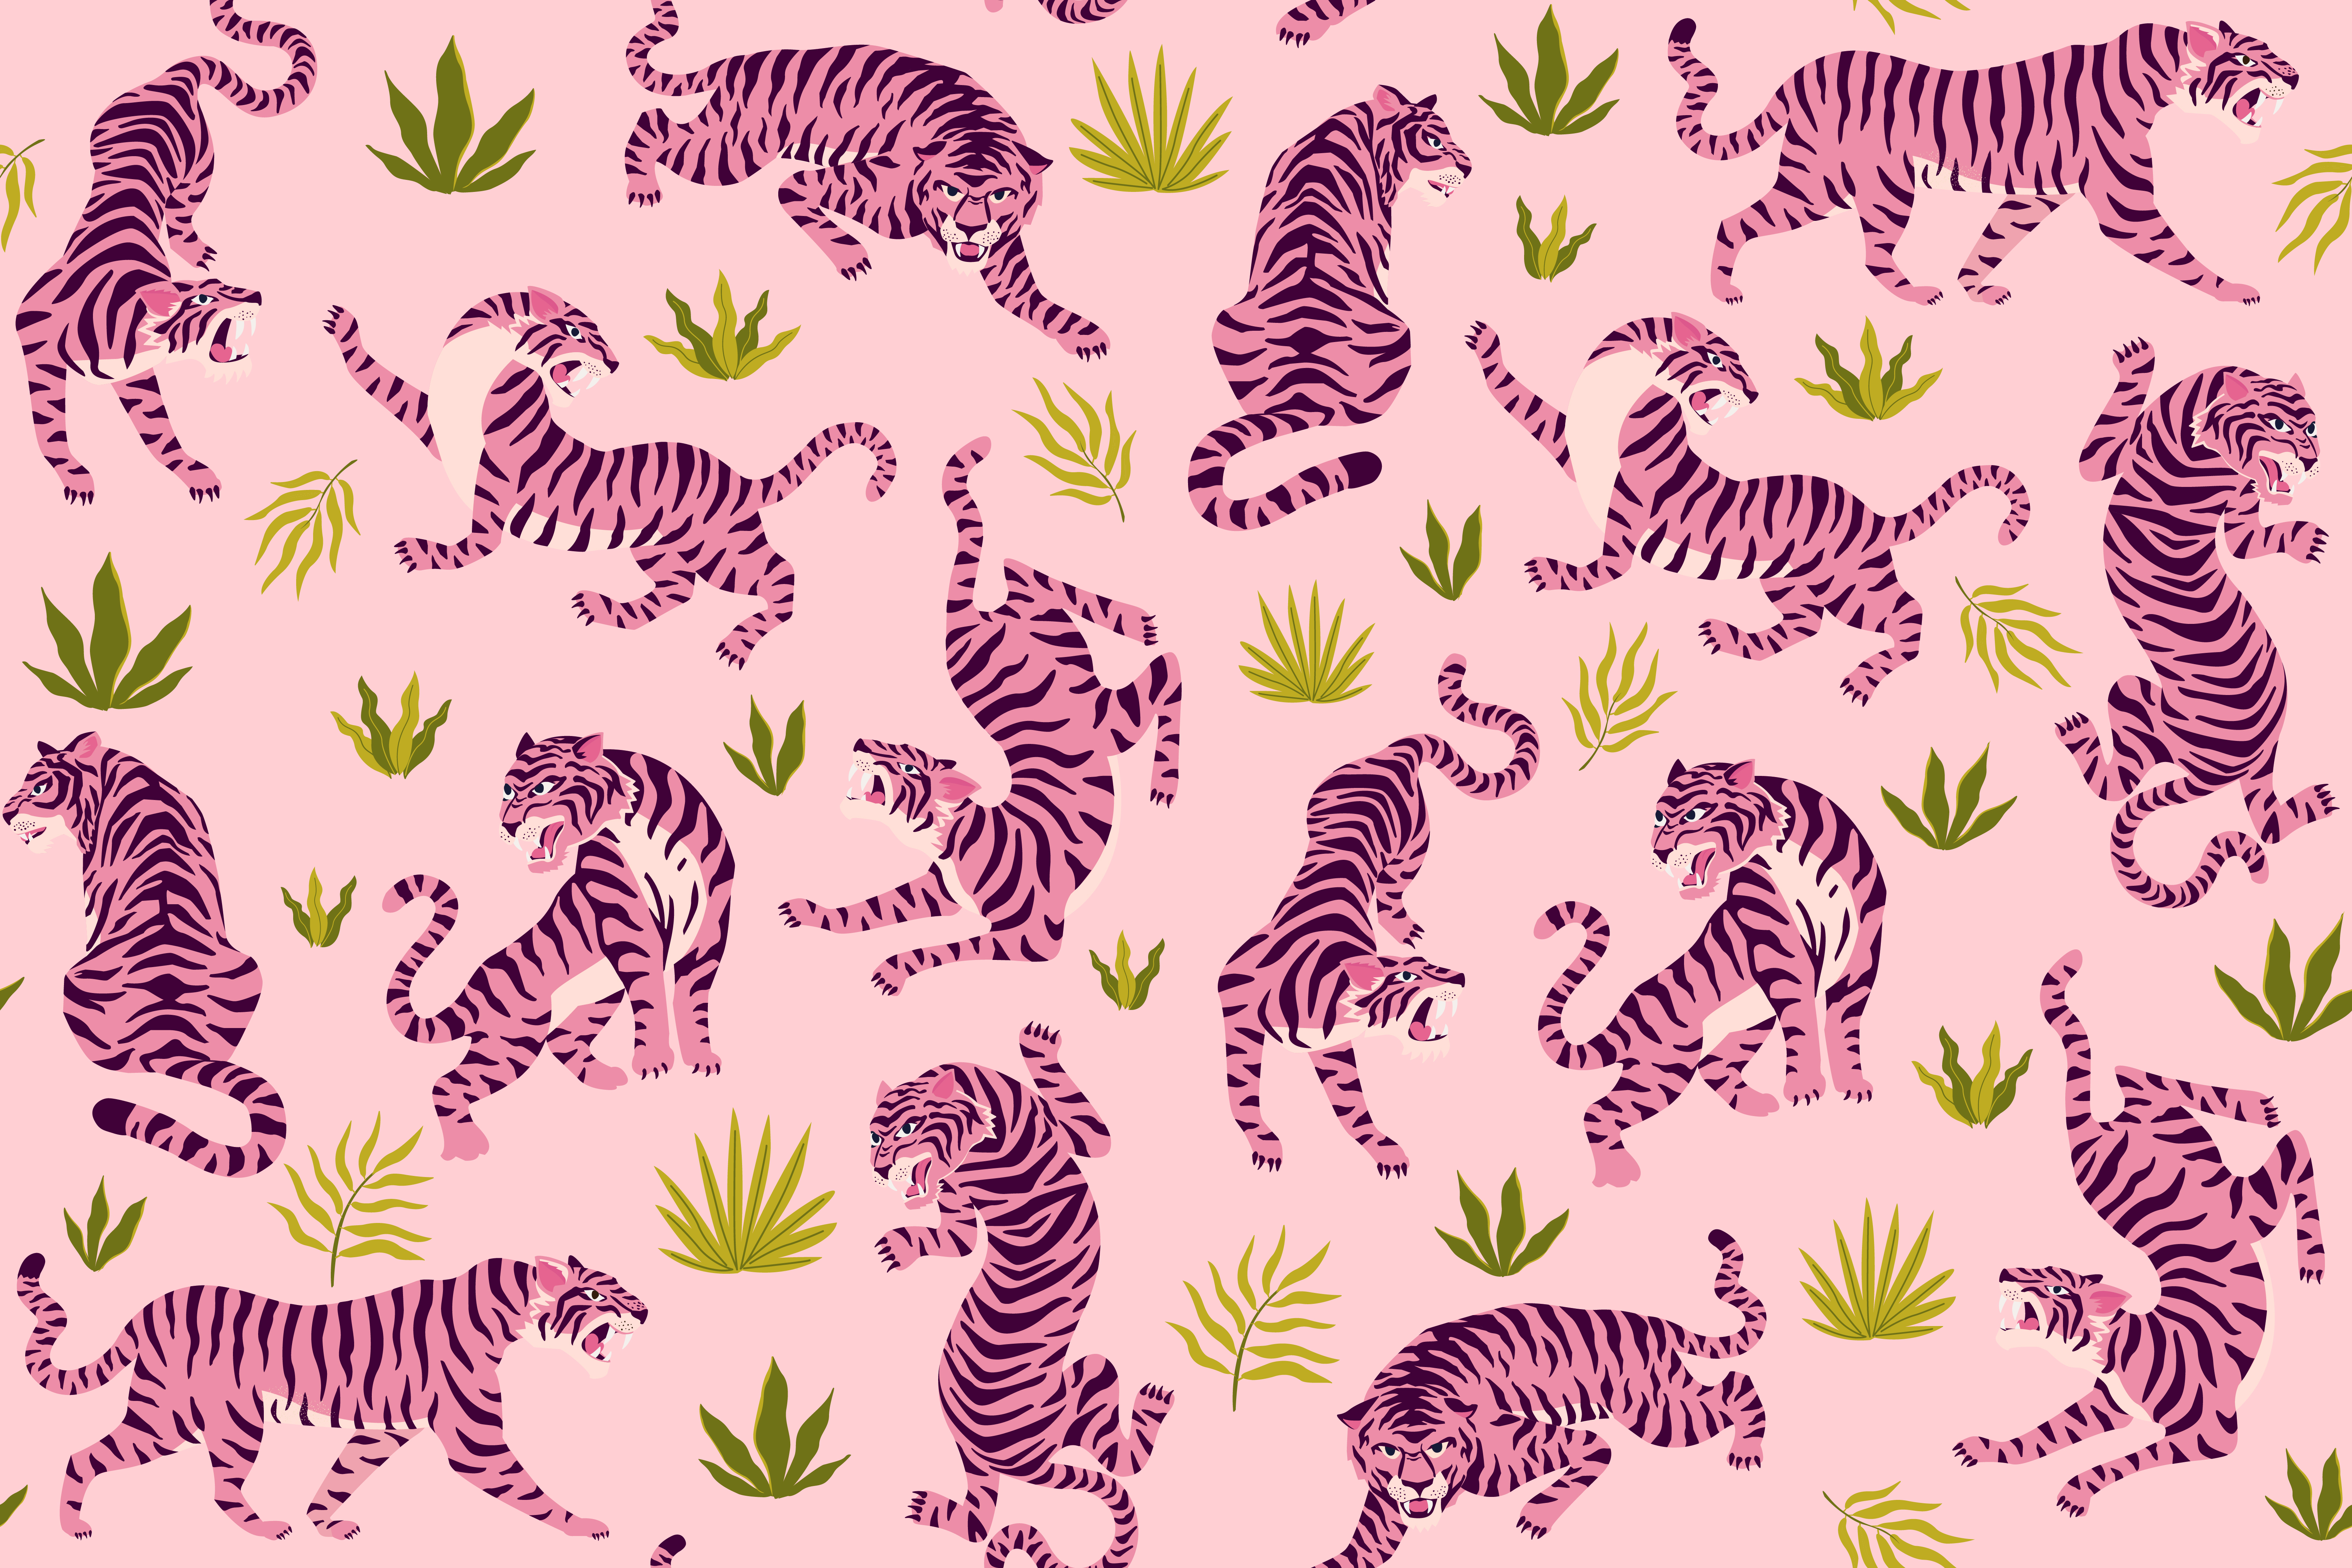 Premium Vector  Tiger leopard texture seamless animal pattern striped  fabric background wild animals skin fur fashion pink abstract design print  for wallpaper decor vector illustration